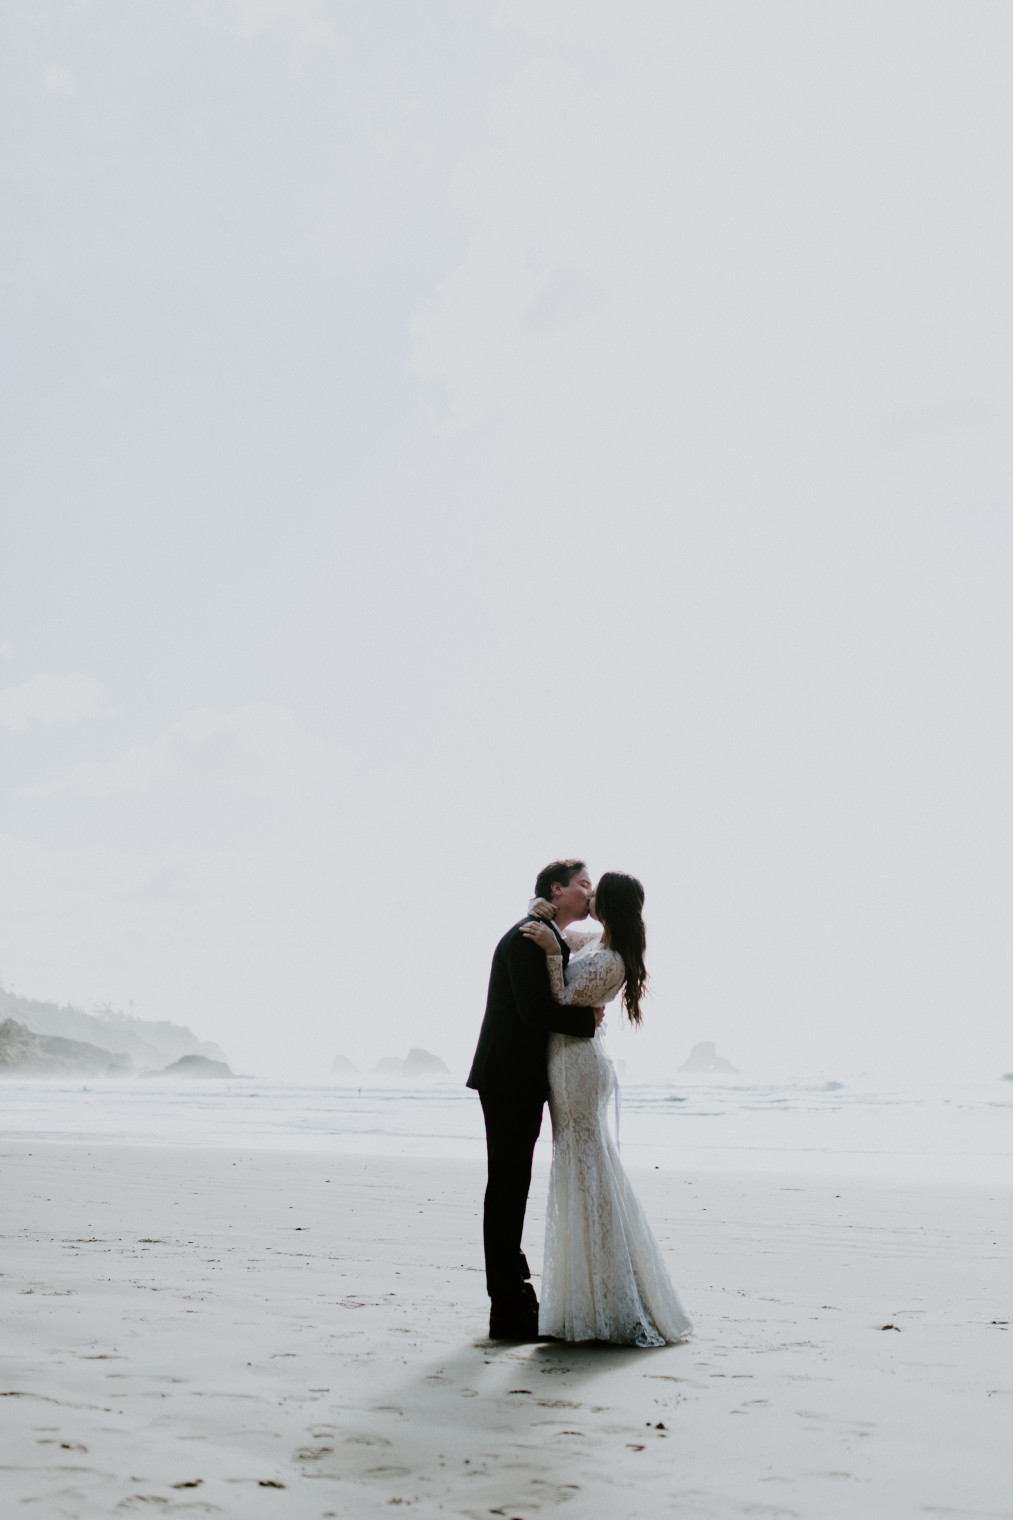 Nicole and Vlad dance on the beach after their elopement. Elopement wedding photography at Cannon Beach by Sienna Plus Josh.